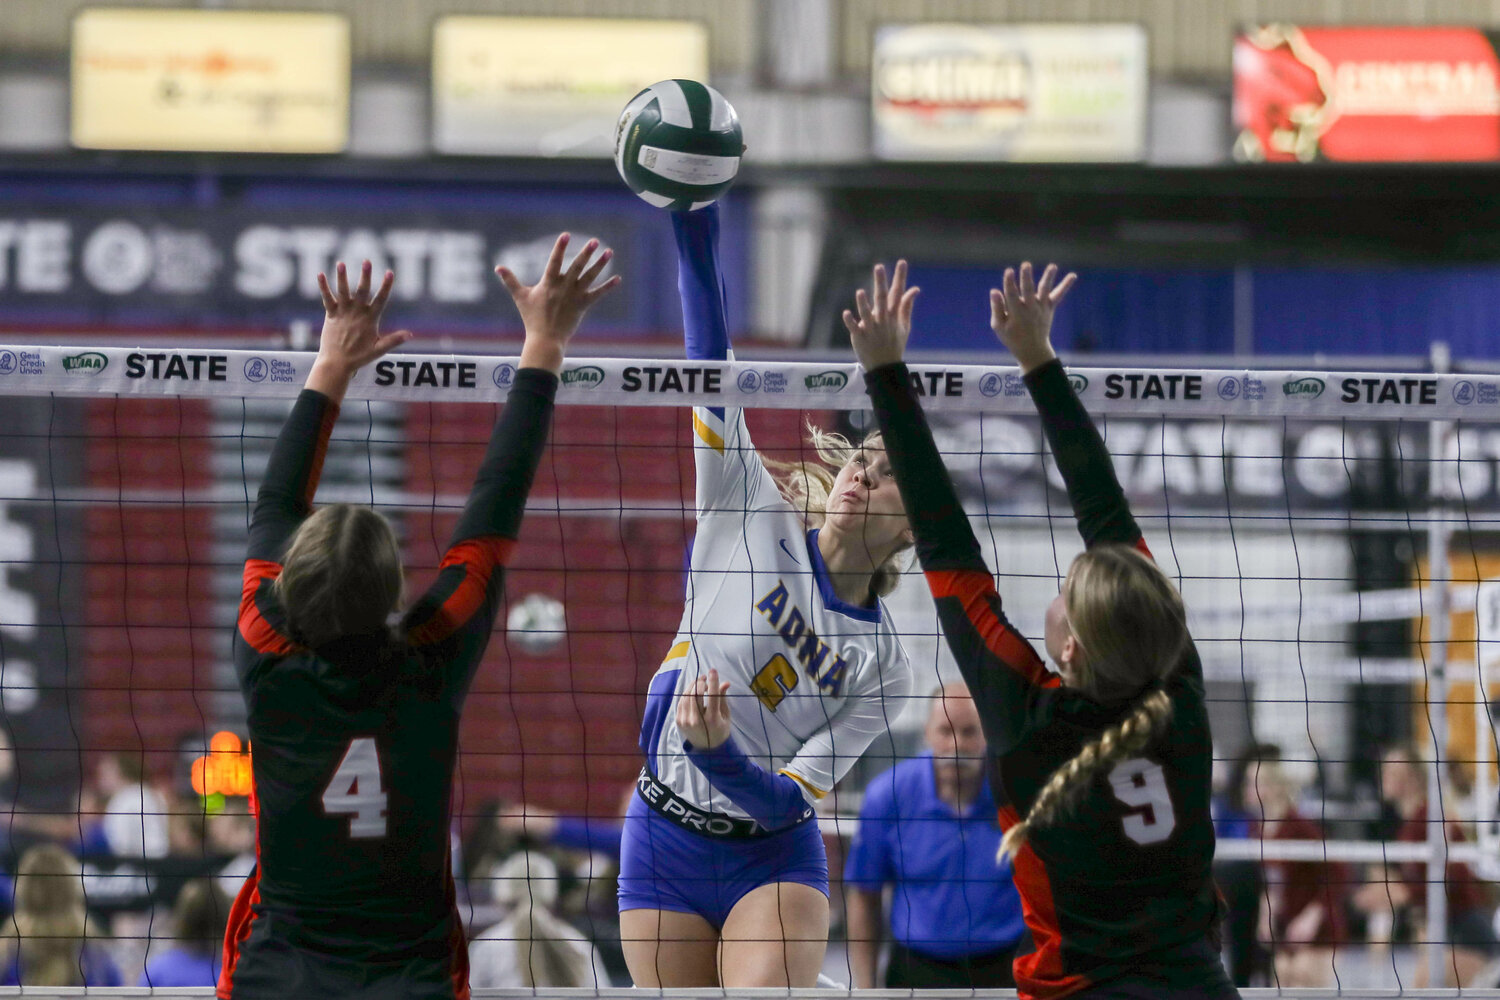 Karsyn Freeman spikes the ball between two defenders during Adna's win over Liberty at the state tournament on Nov. 9 in Yakima.